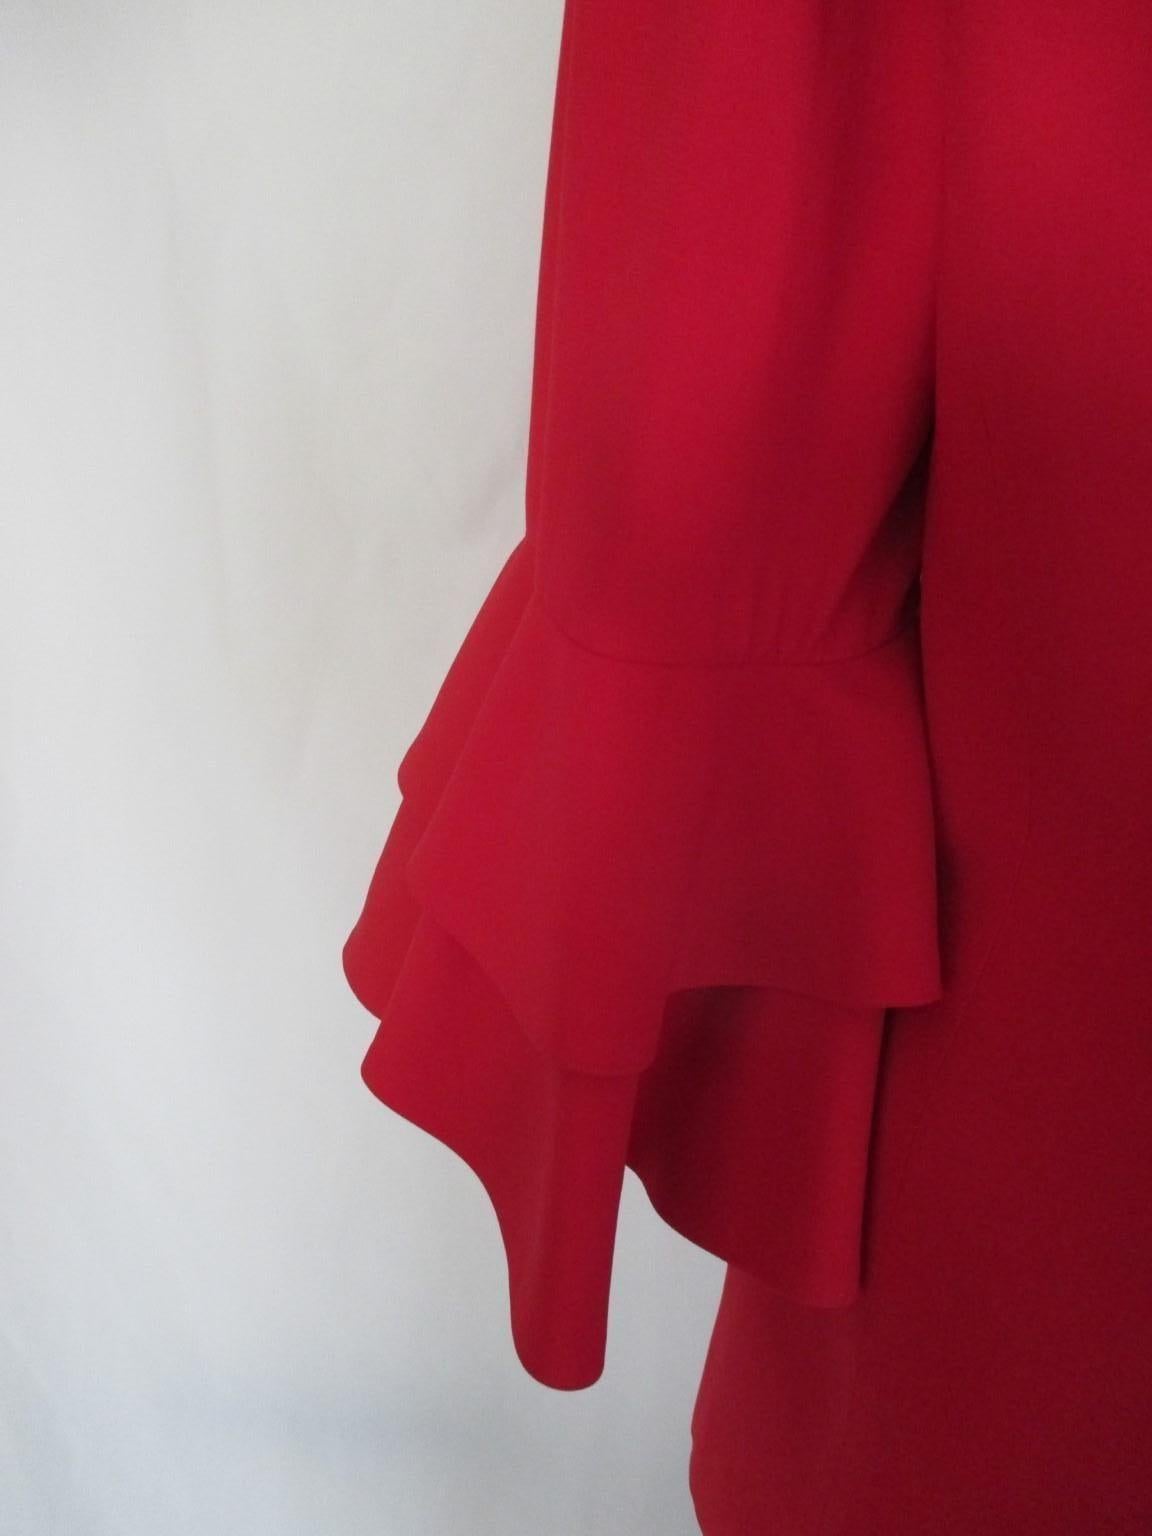 Women's Moschino Couture! Repetita Juvant Red Blazer Jacket For Sale